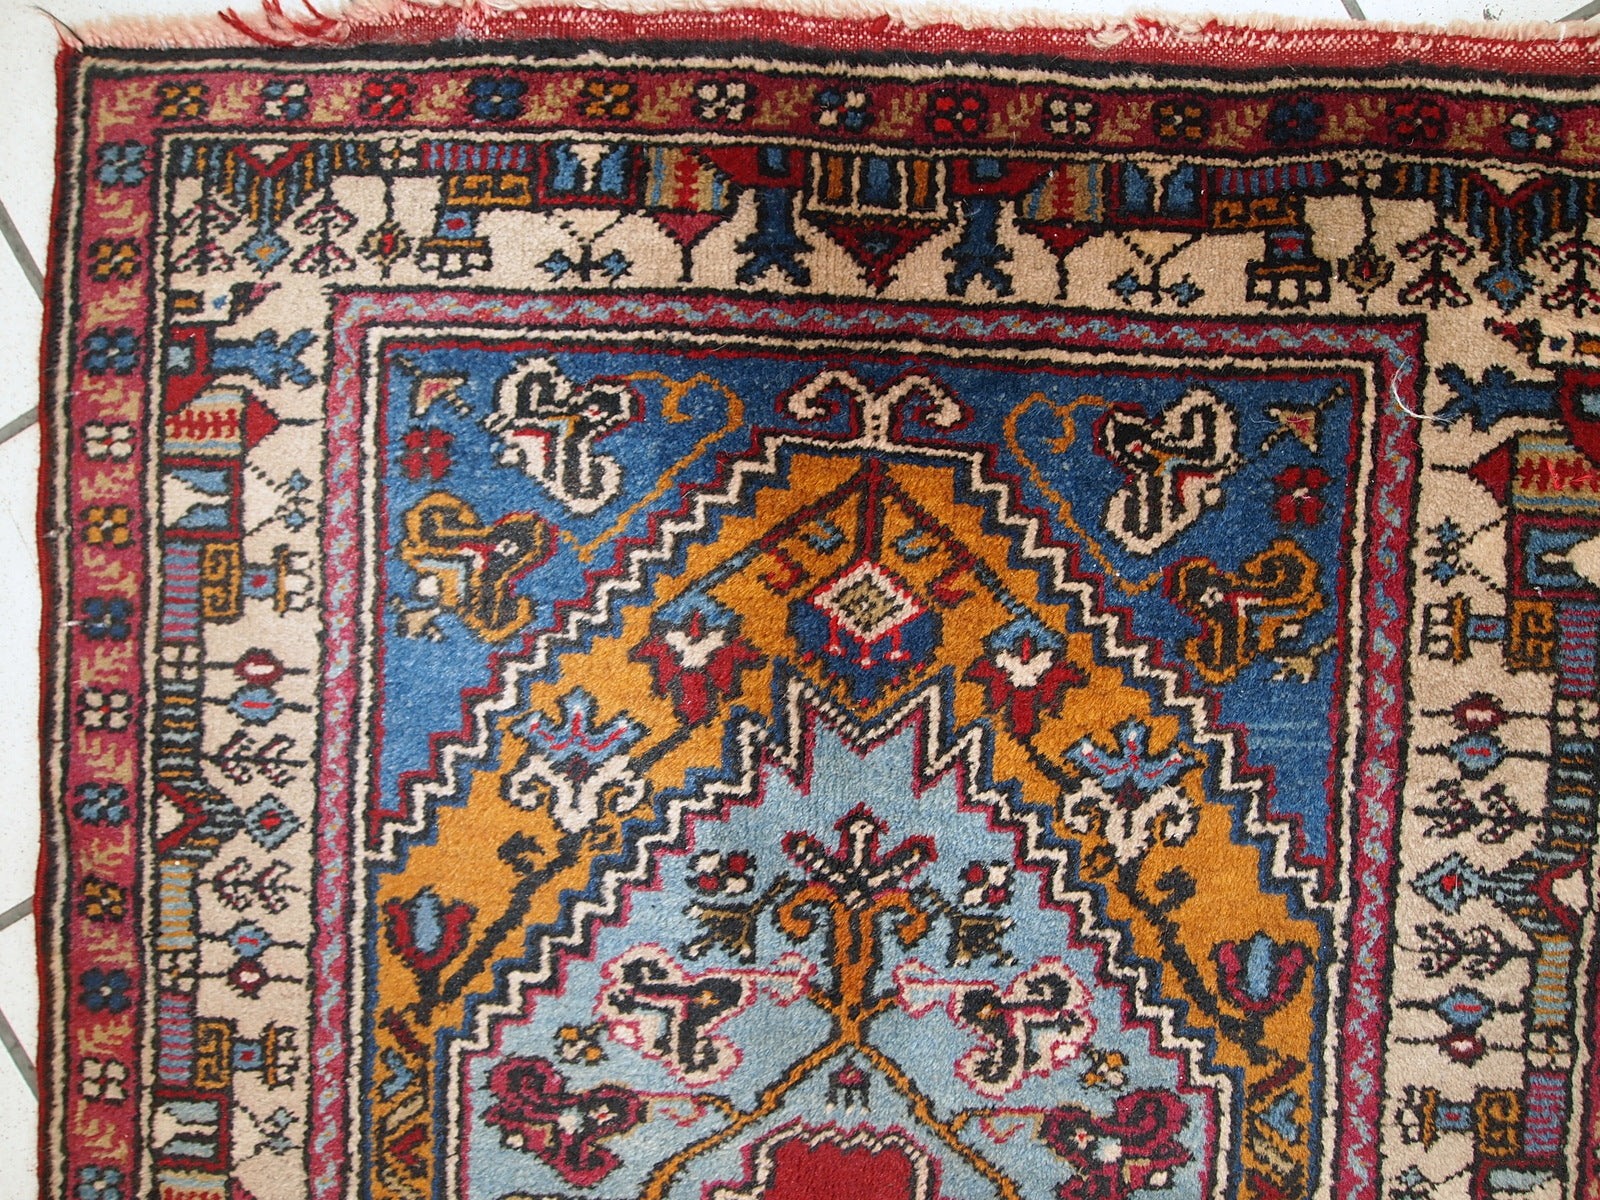 This vintage prayer Turkish rug made in colorful shades of wool. The rug is quite thick and soft. Beautiful beige border with colorful houses on it. The rug is in original good condition.